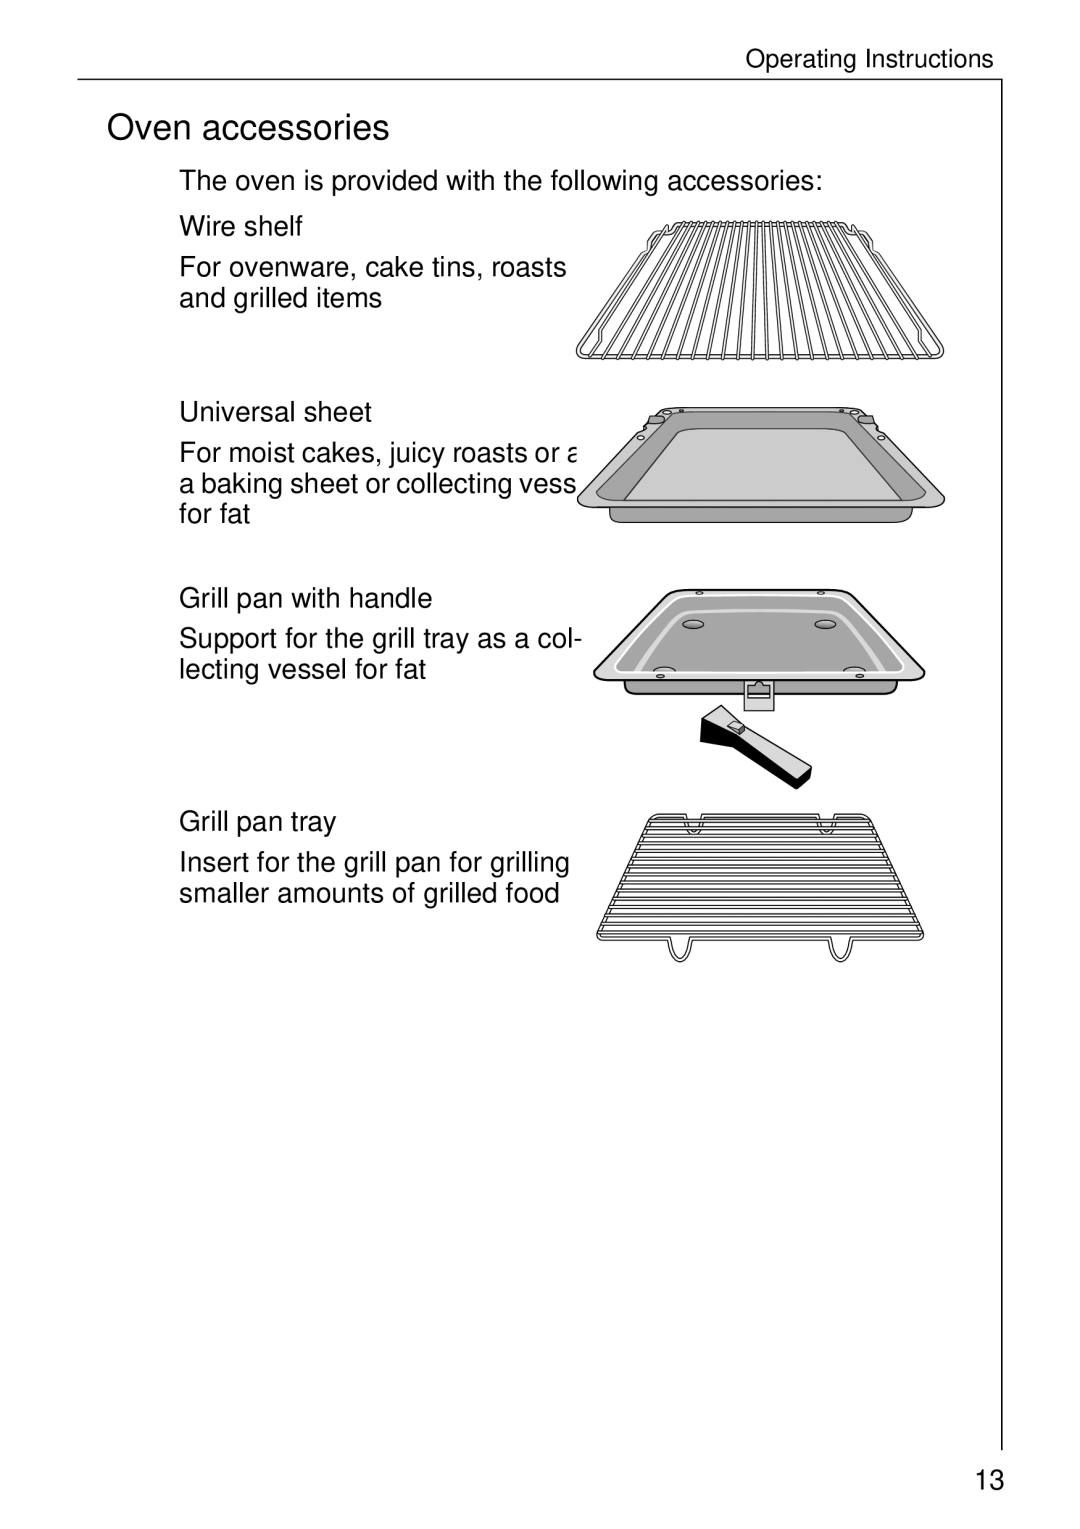 Electrolux B 81005 manual Oven accessories, Wire shelf, Universal sheet, Grill pan with handle, Grill pan tray 